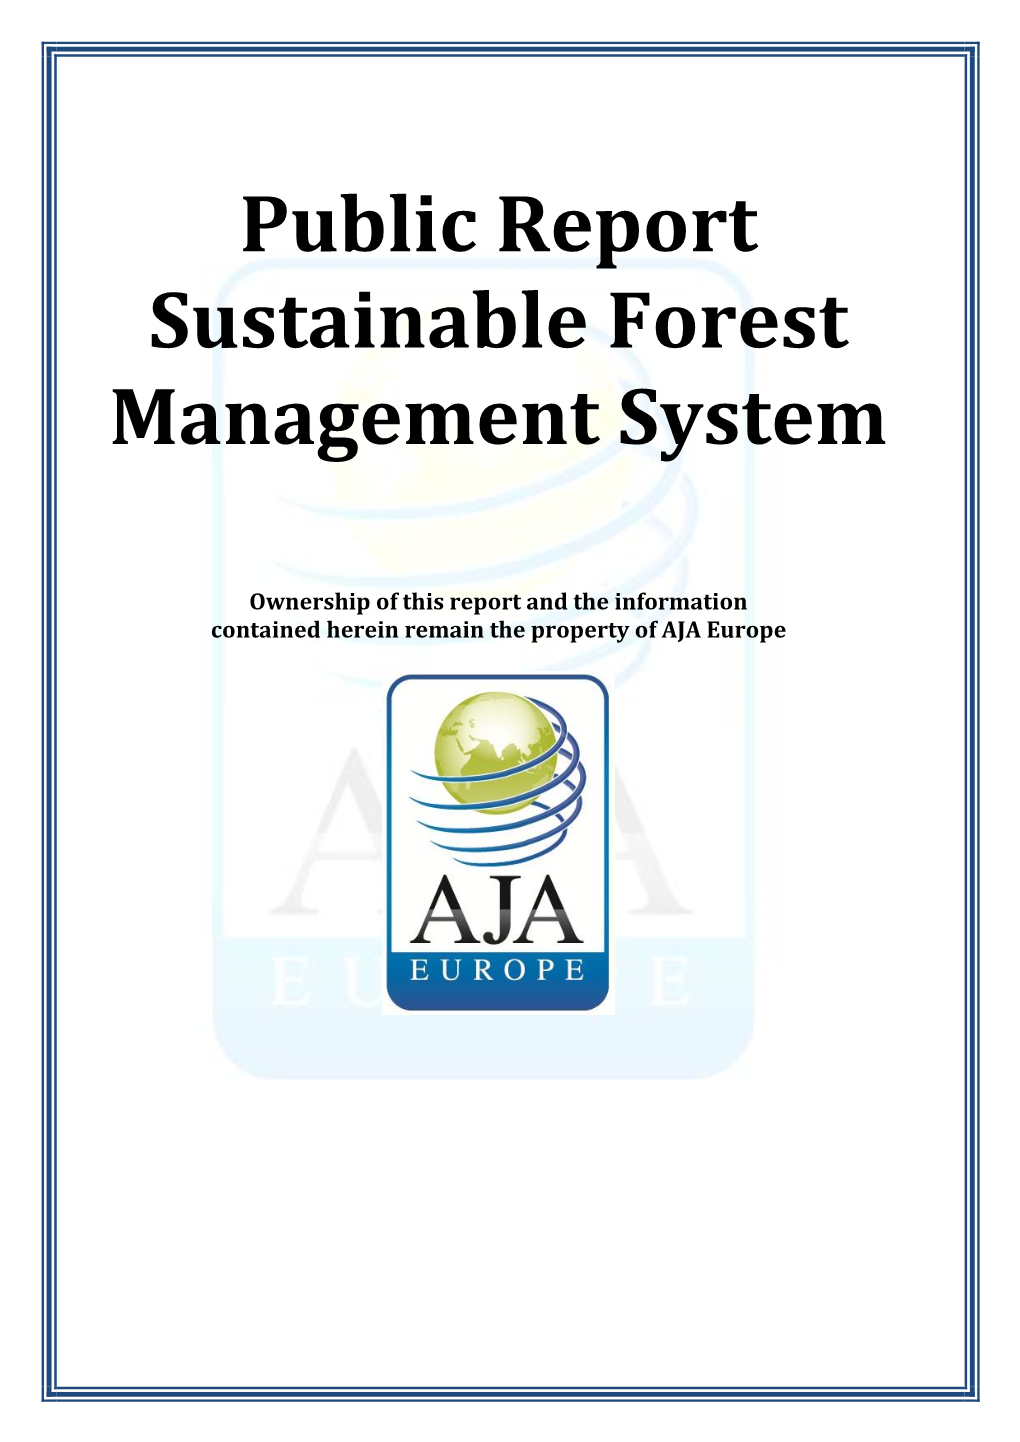 Public Report Sustainable Forest Management System